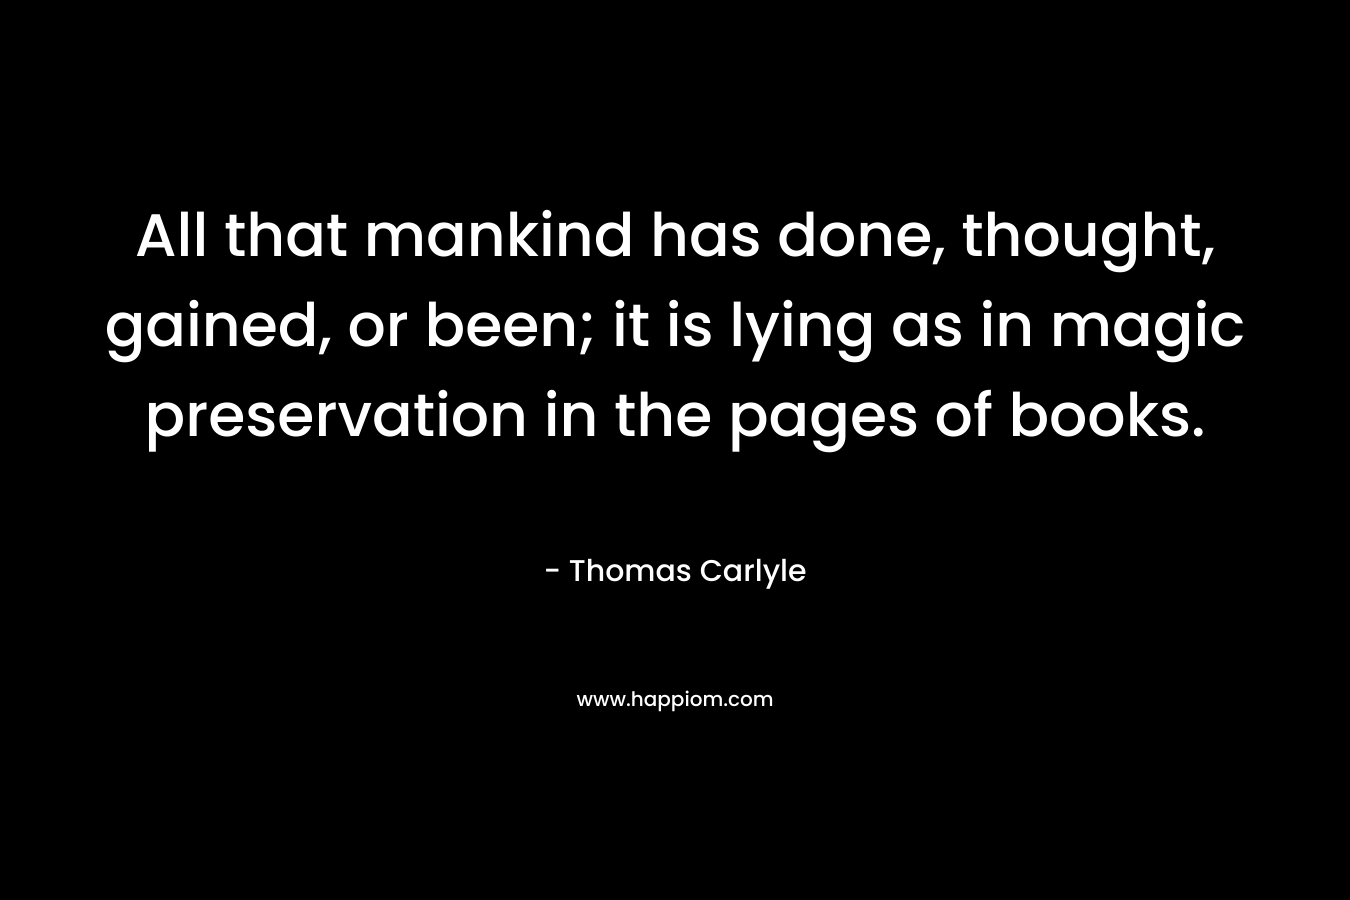 All that mankind has done, thought, gained, or been; it is lying as in magic preservation in the pages of books.